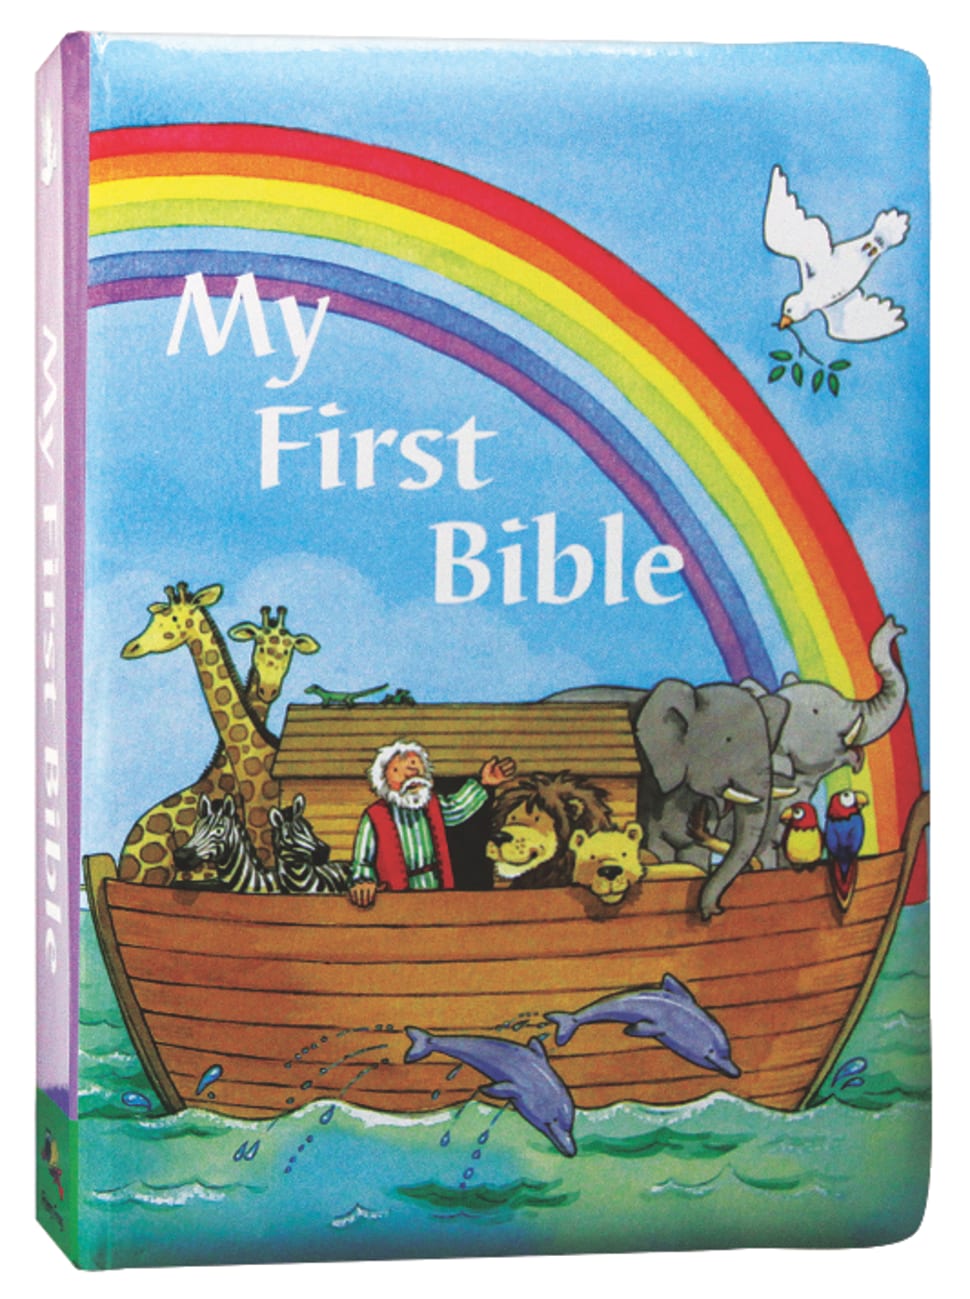 MY FIRST BIBLE (PADDED BOARD BOOK)